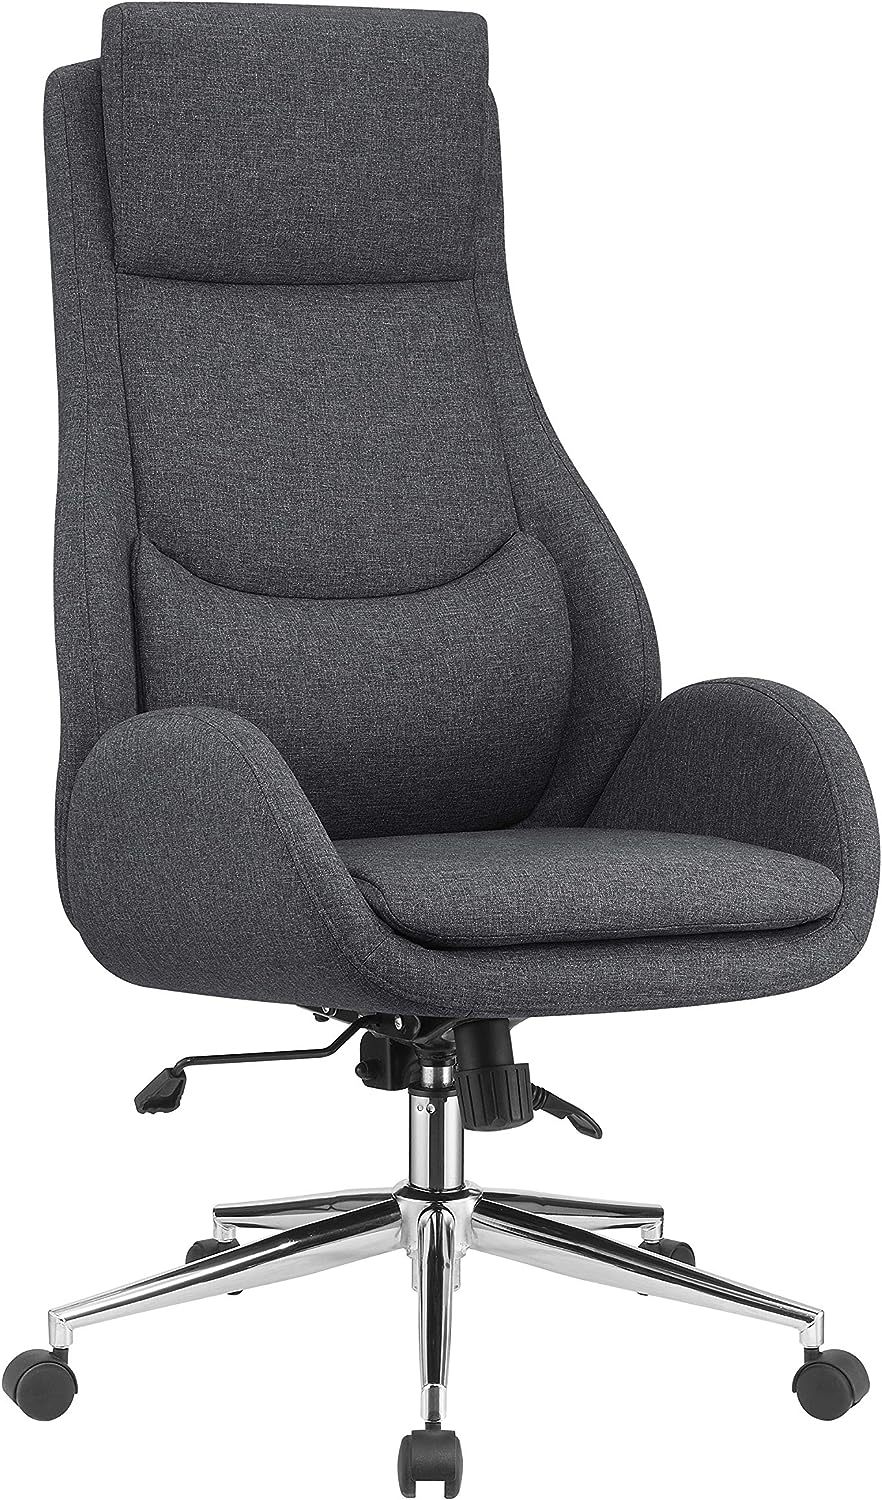 Primary image for Coaster Home Furnishings Upholstered Padded Seat Grey And Chrome Office, 49" H.